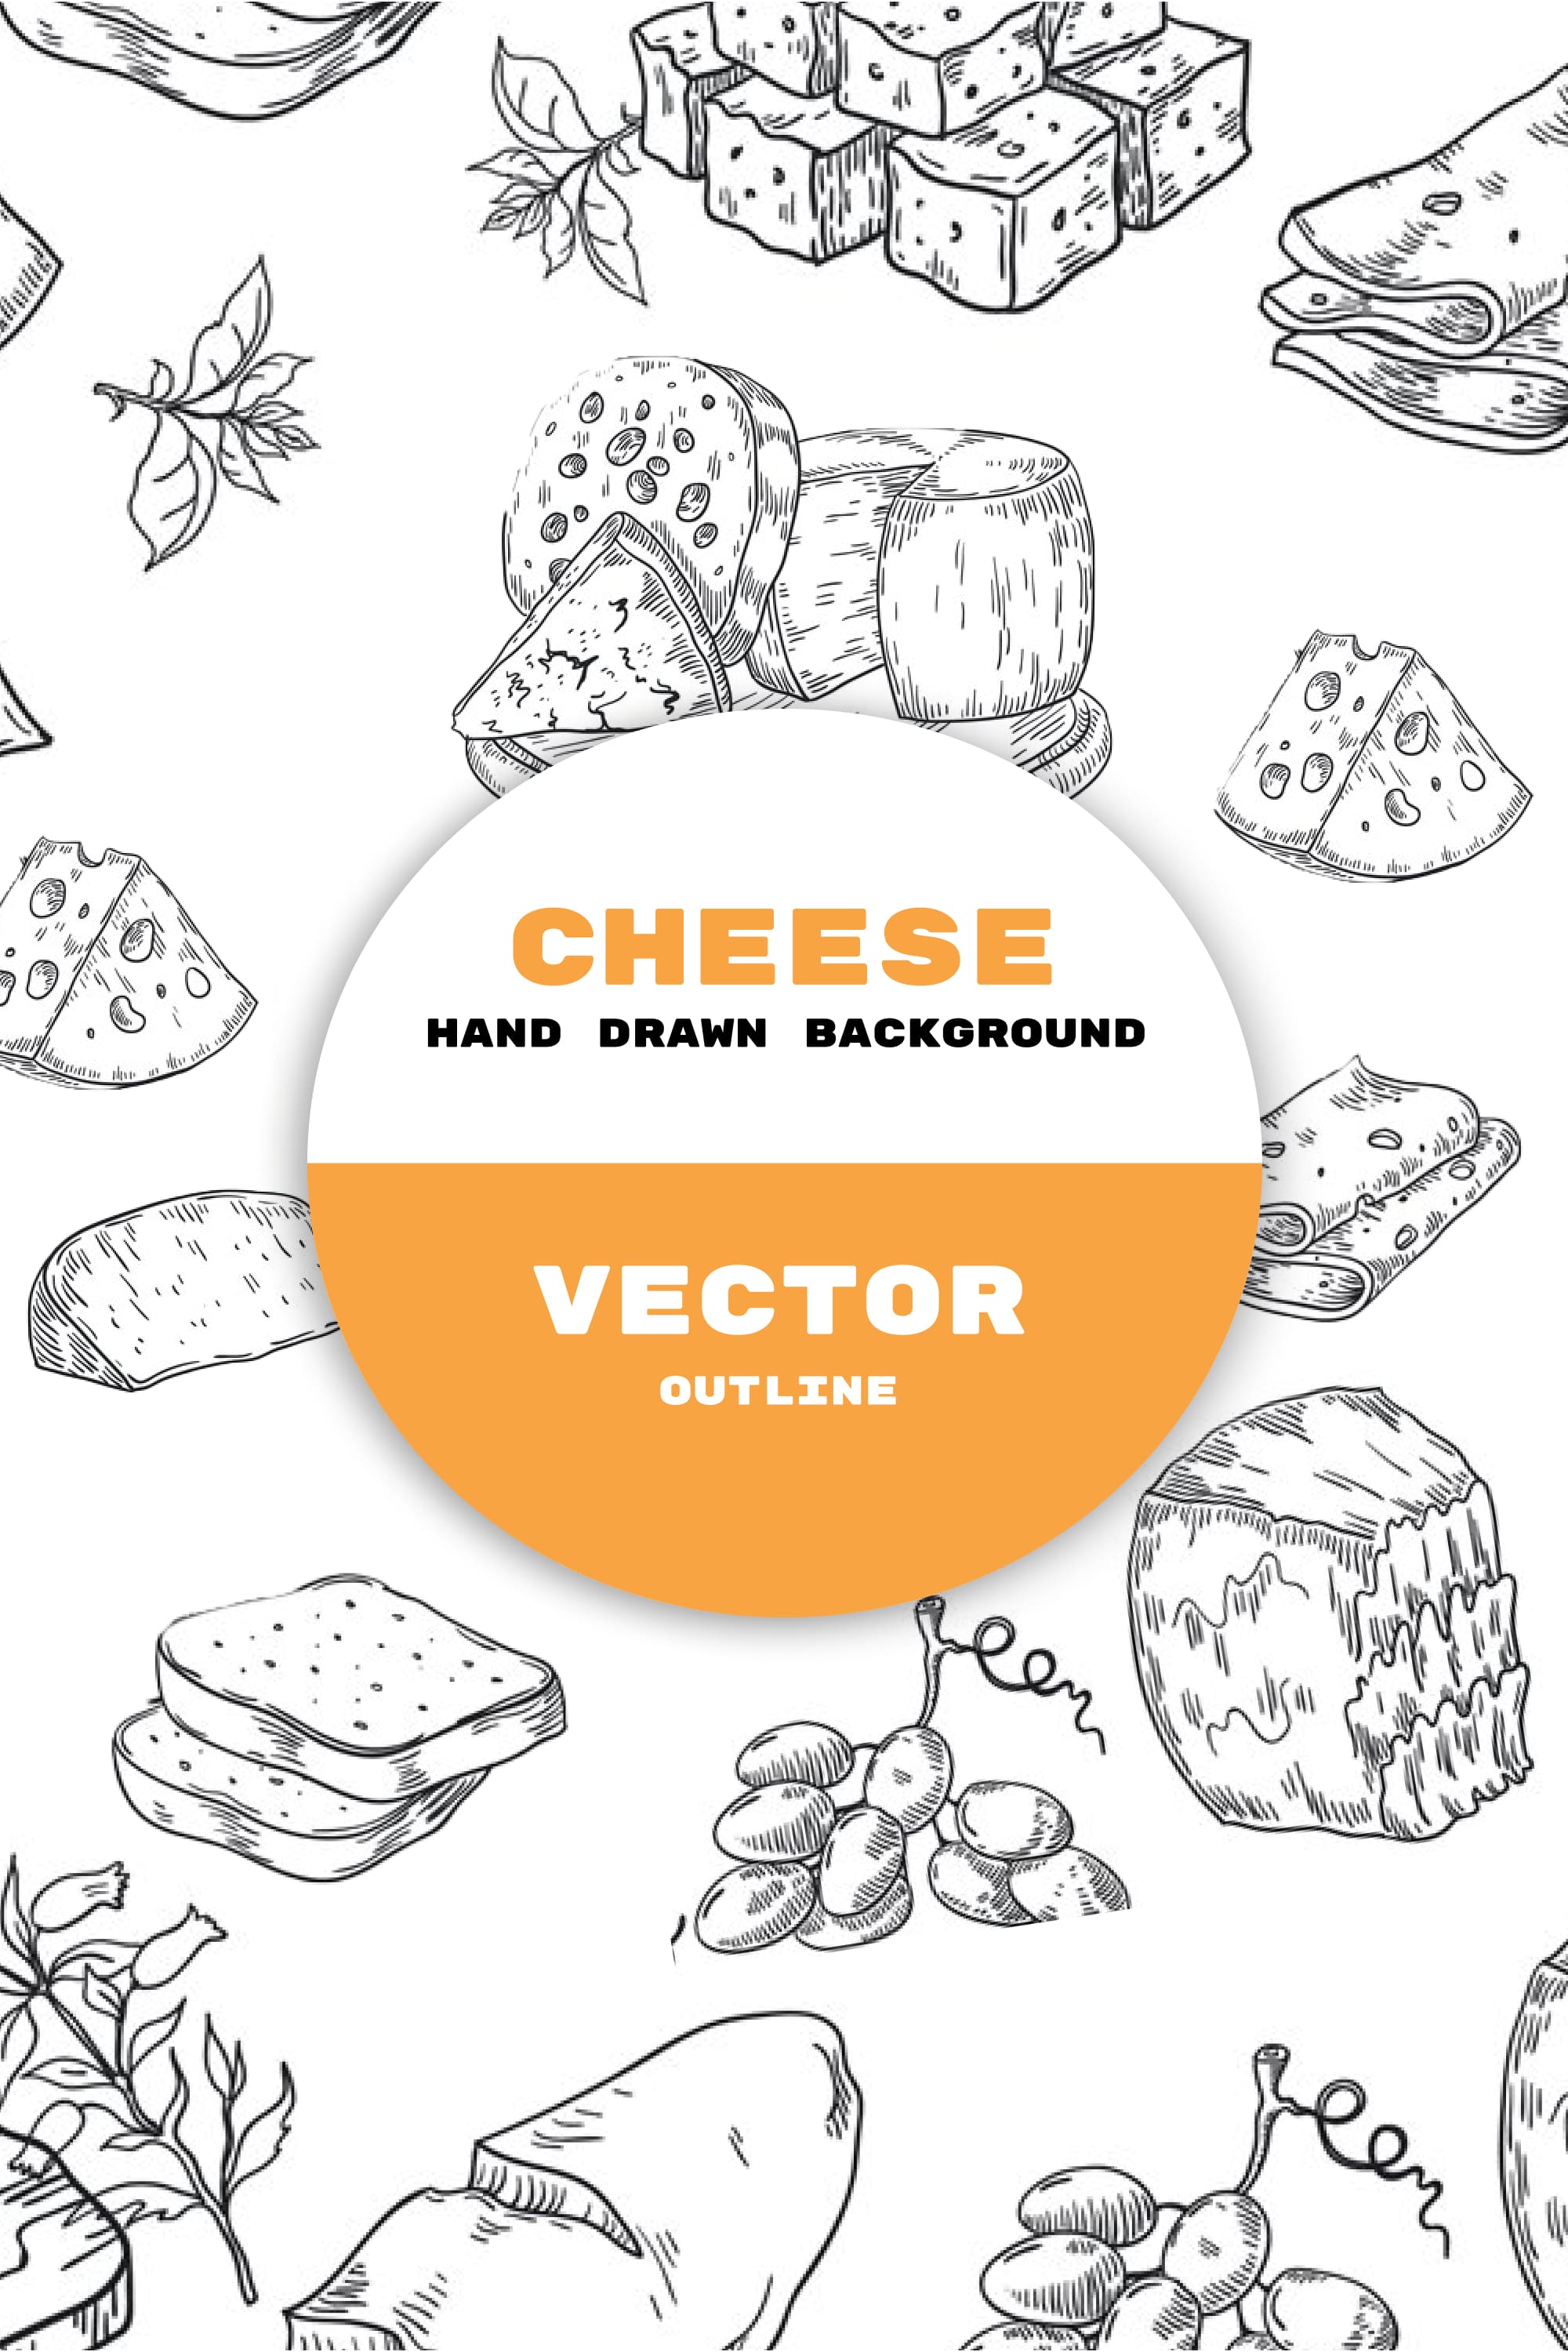 Background image of hard cheese and Italian snacks hand drawn.